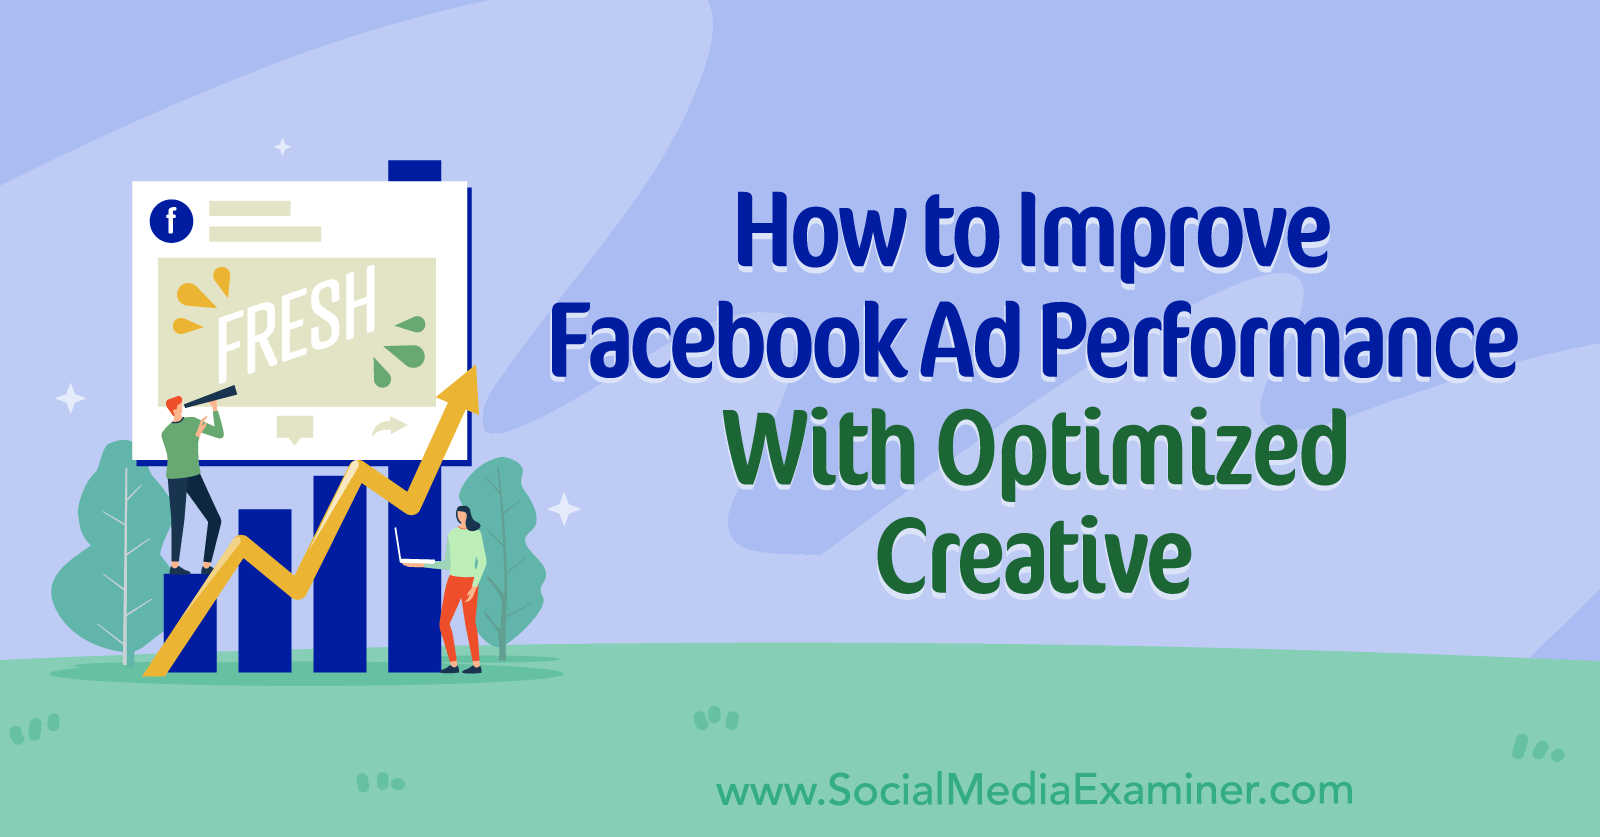 How to Improve Facebook Ad Performance With Optimized Creative by Social Media Examiner